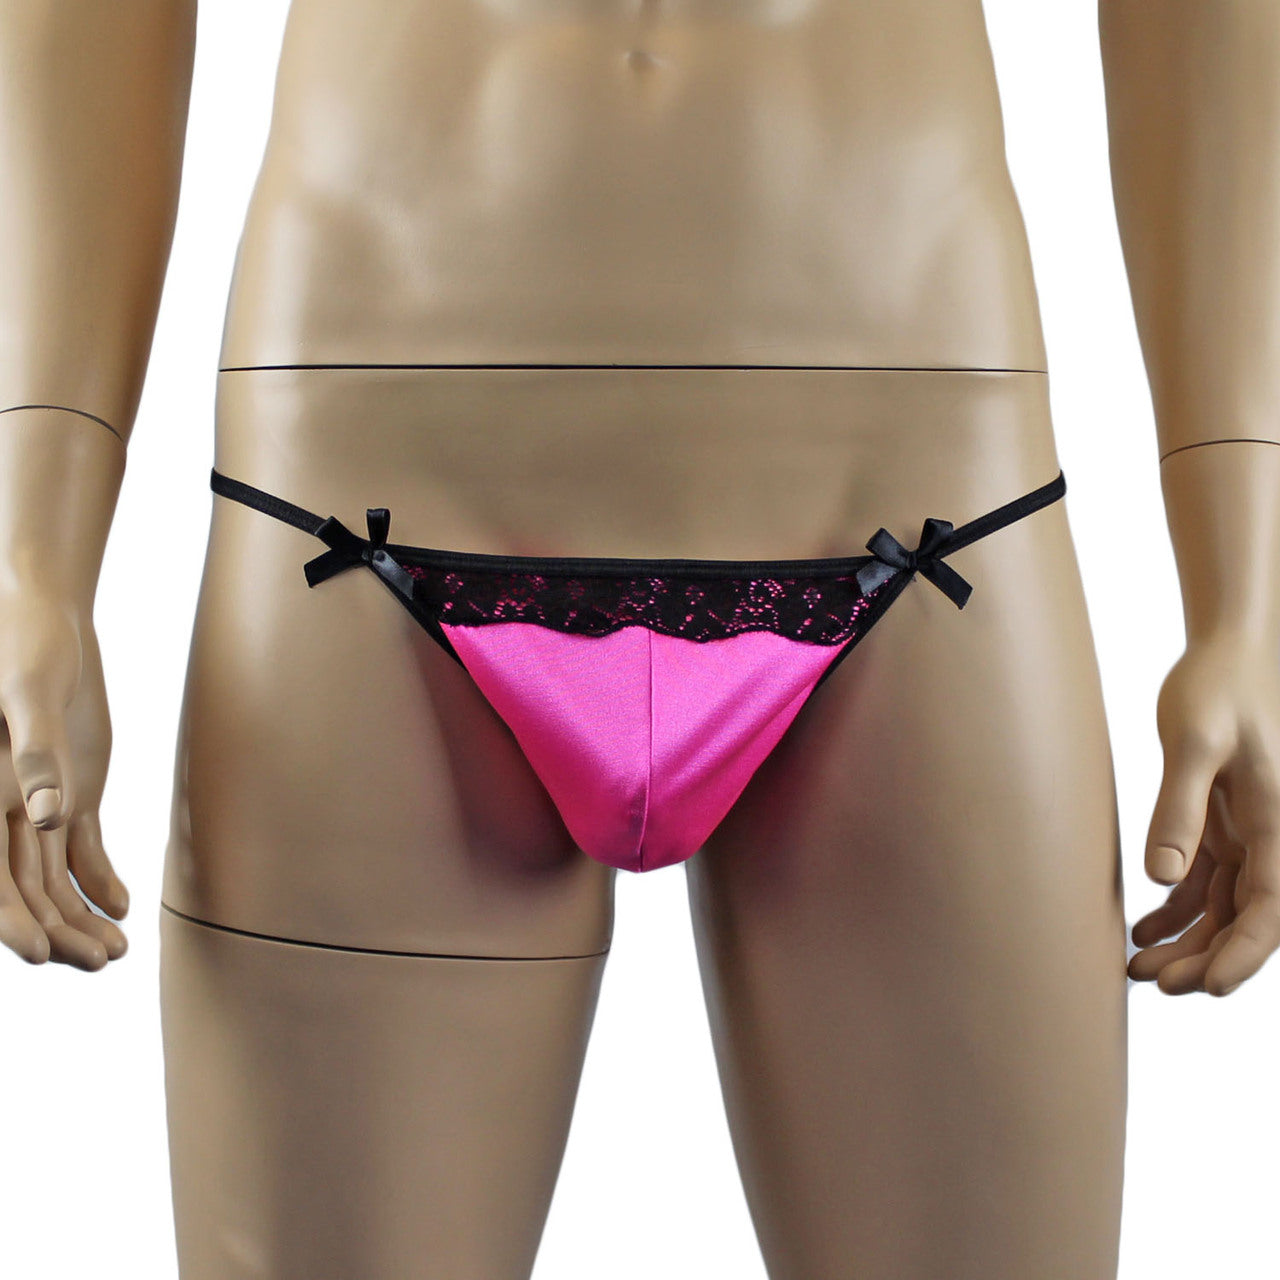 Mens Feminine Satin, Lace and Bow Pouch G string Hot Pink and Black